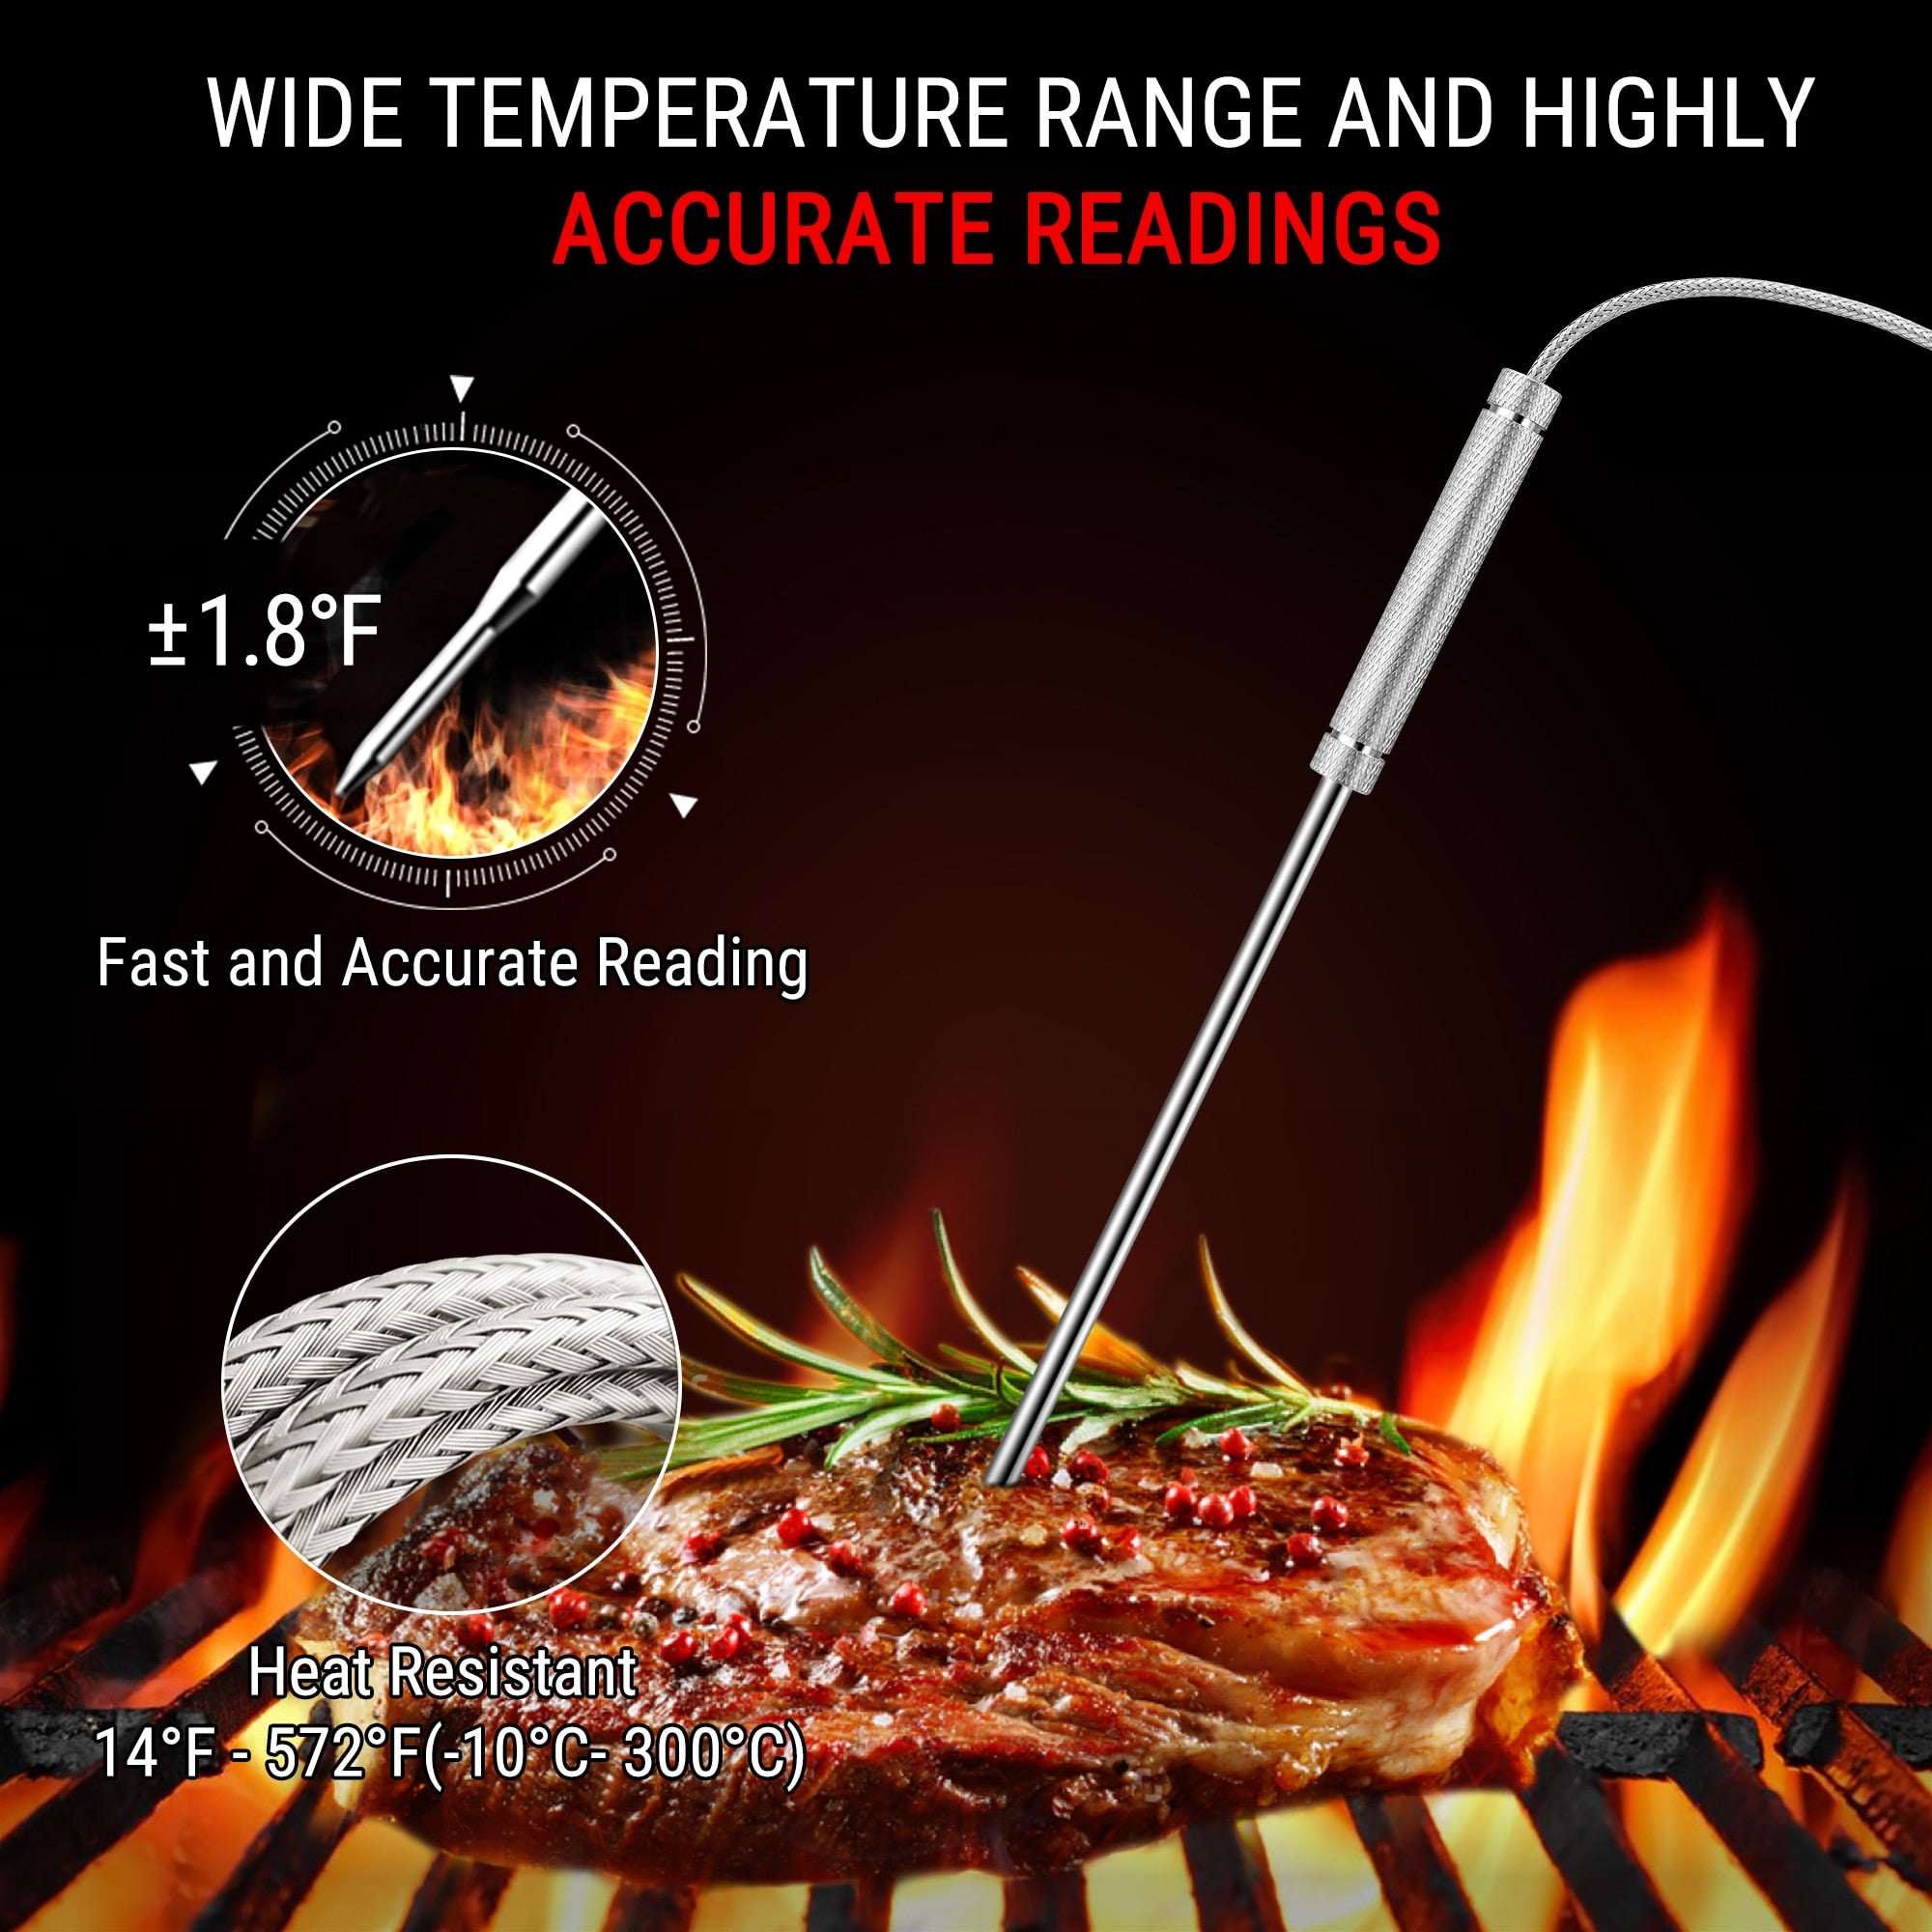 ThermoPro TP17 Digital Backlight Large LCD Display Dual Probe BBQ Oven –  Grillin' Shit